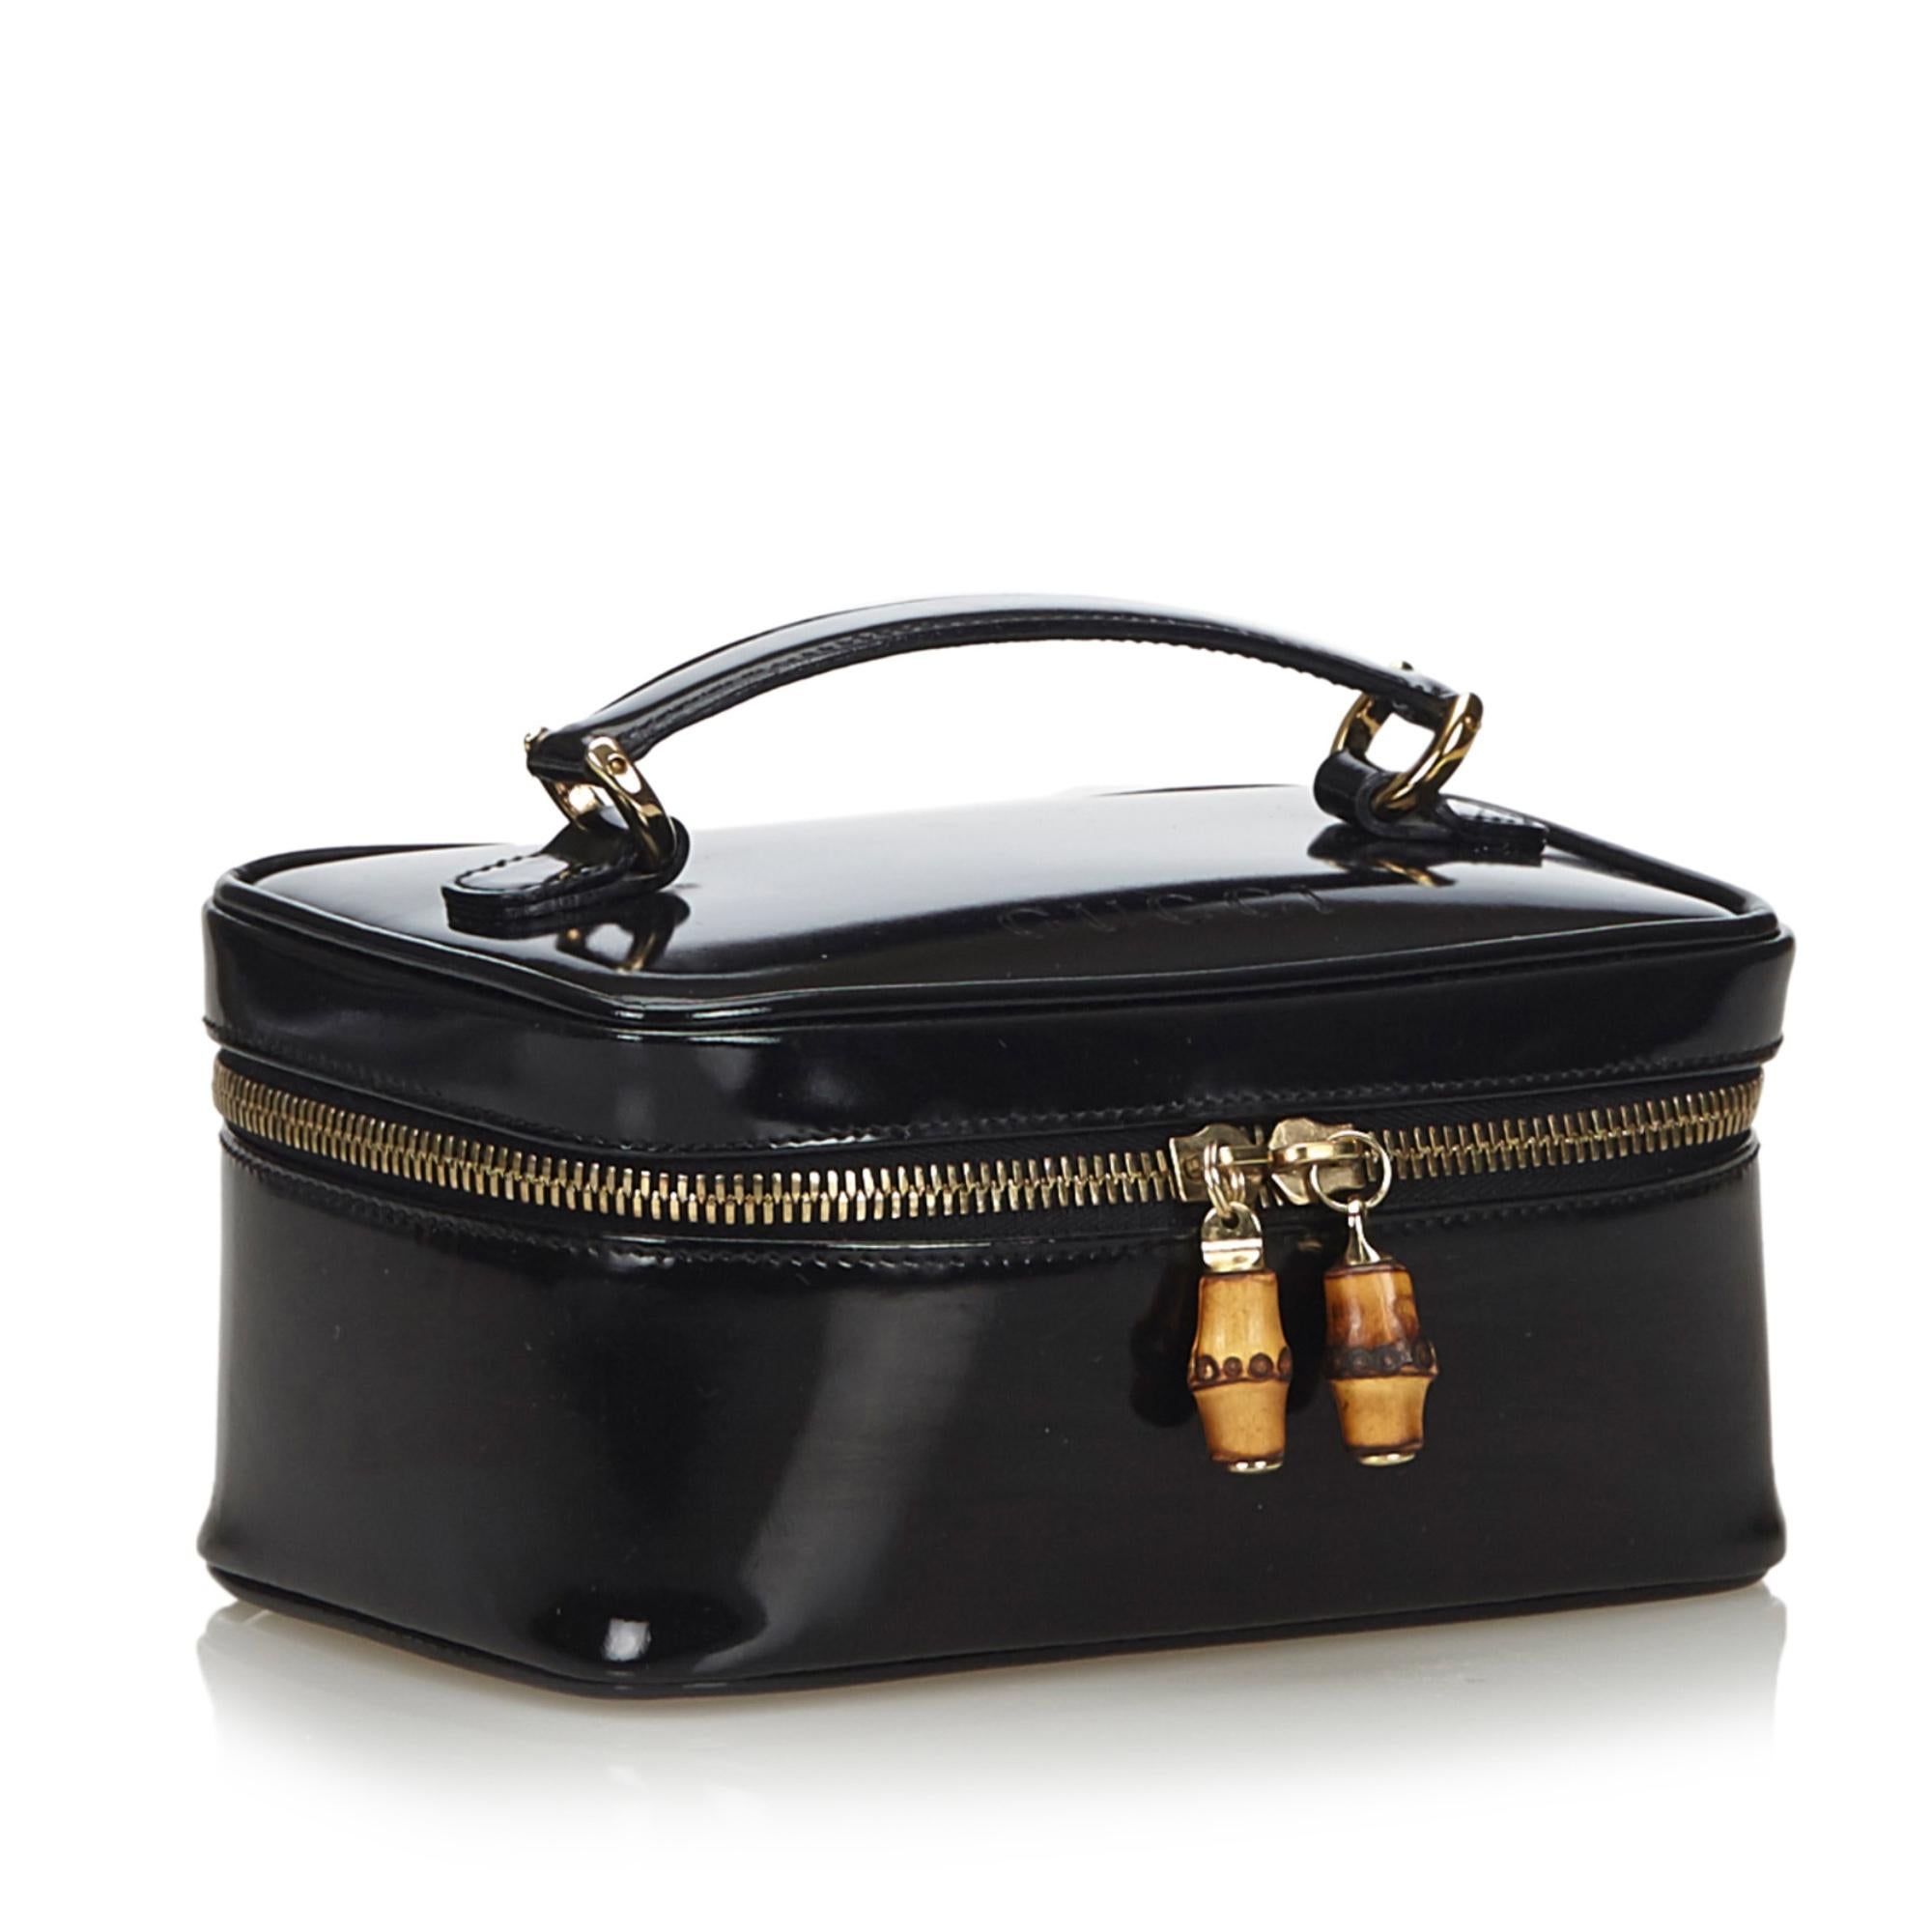 This vanity bag features a patent leather body, a top leather handle, and a zip around closure with bamboo details. It carries as B+ condition rating.

Inclusions: 
Box

Dimensions:
Length: 8.50 cm
Width: 18.00 cm
Depth: 11.00 cm
Hand Drop: 4.00